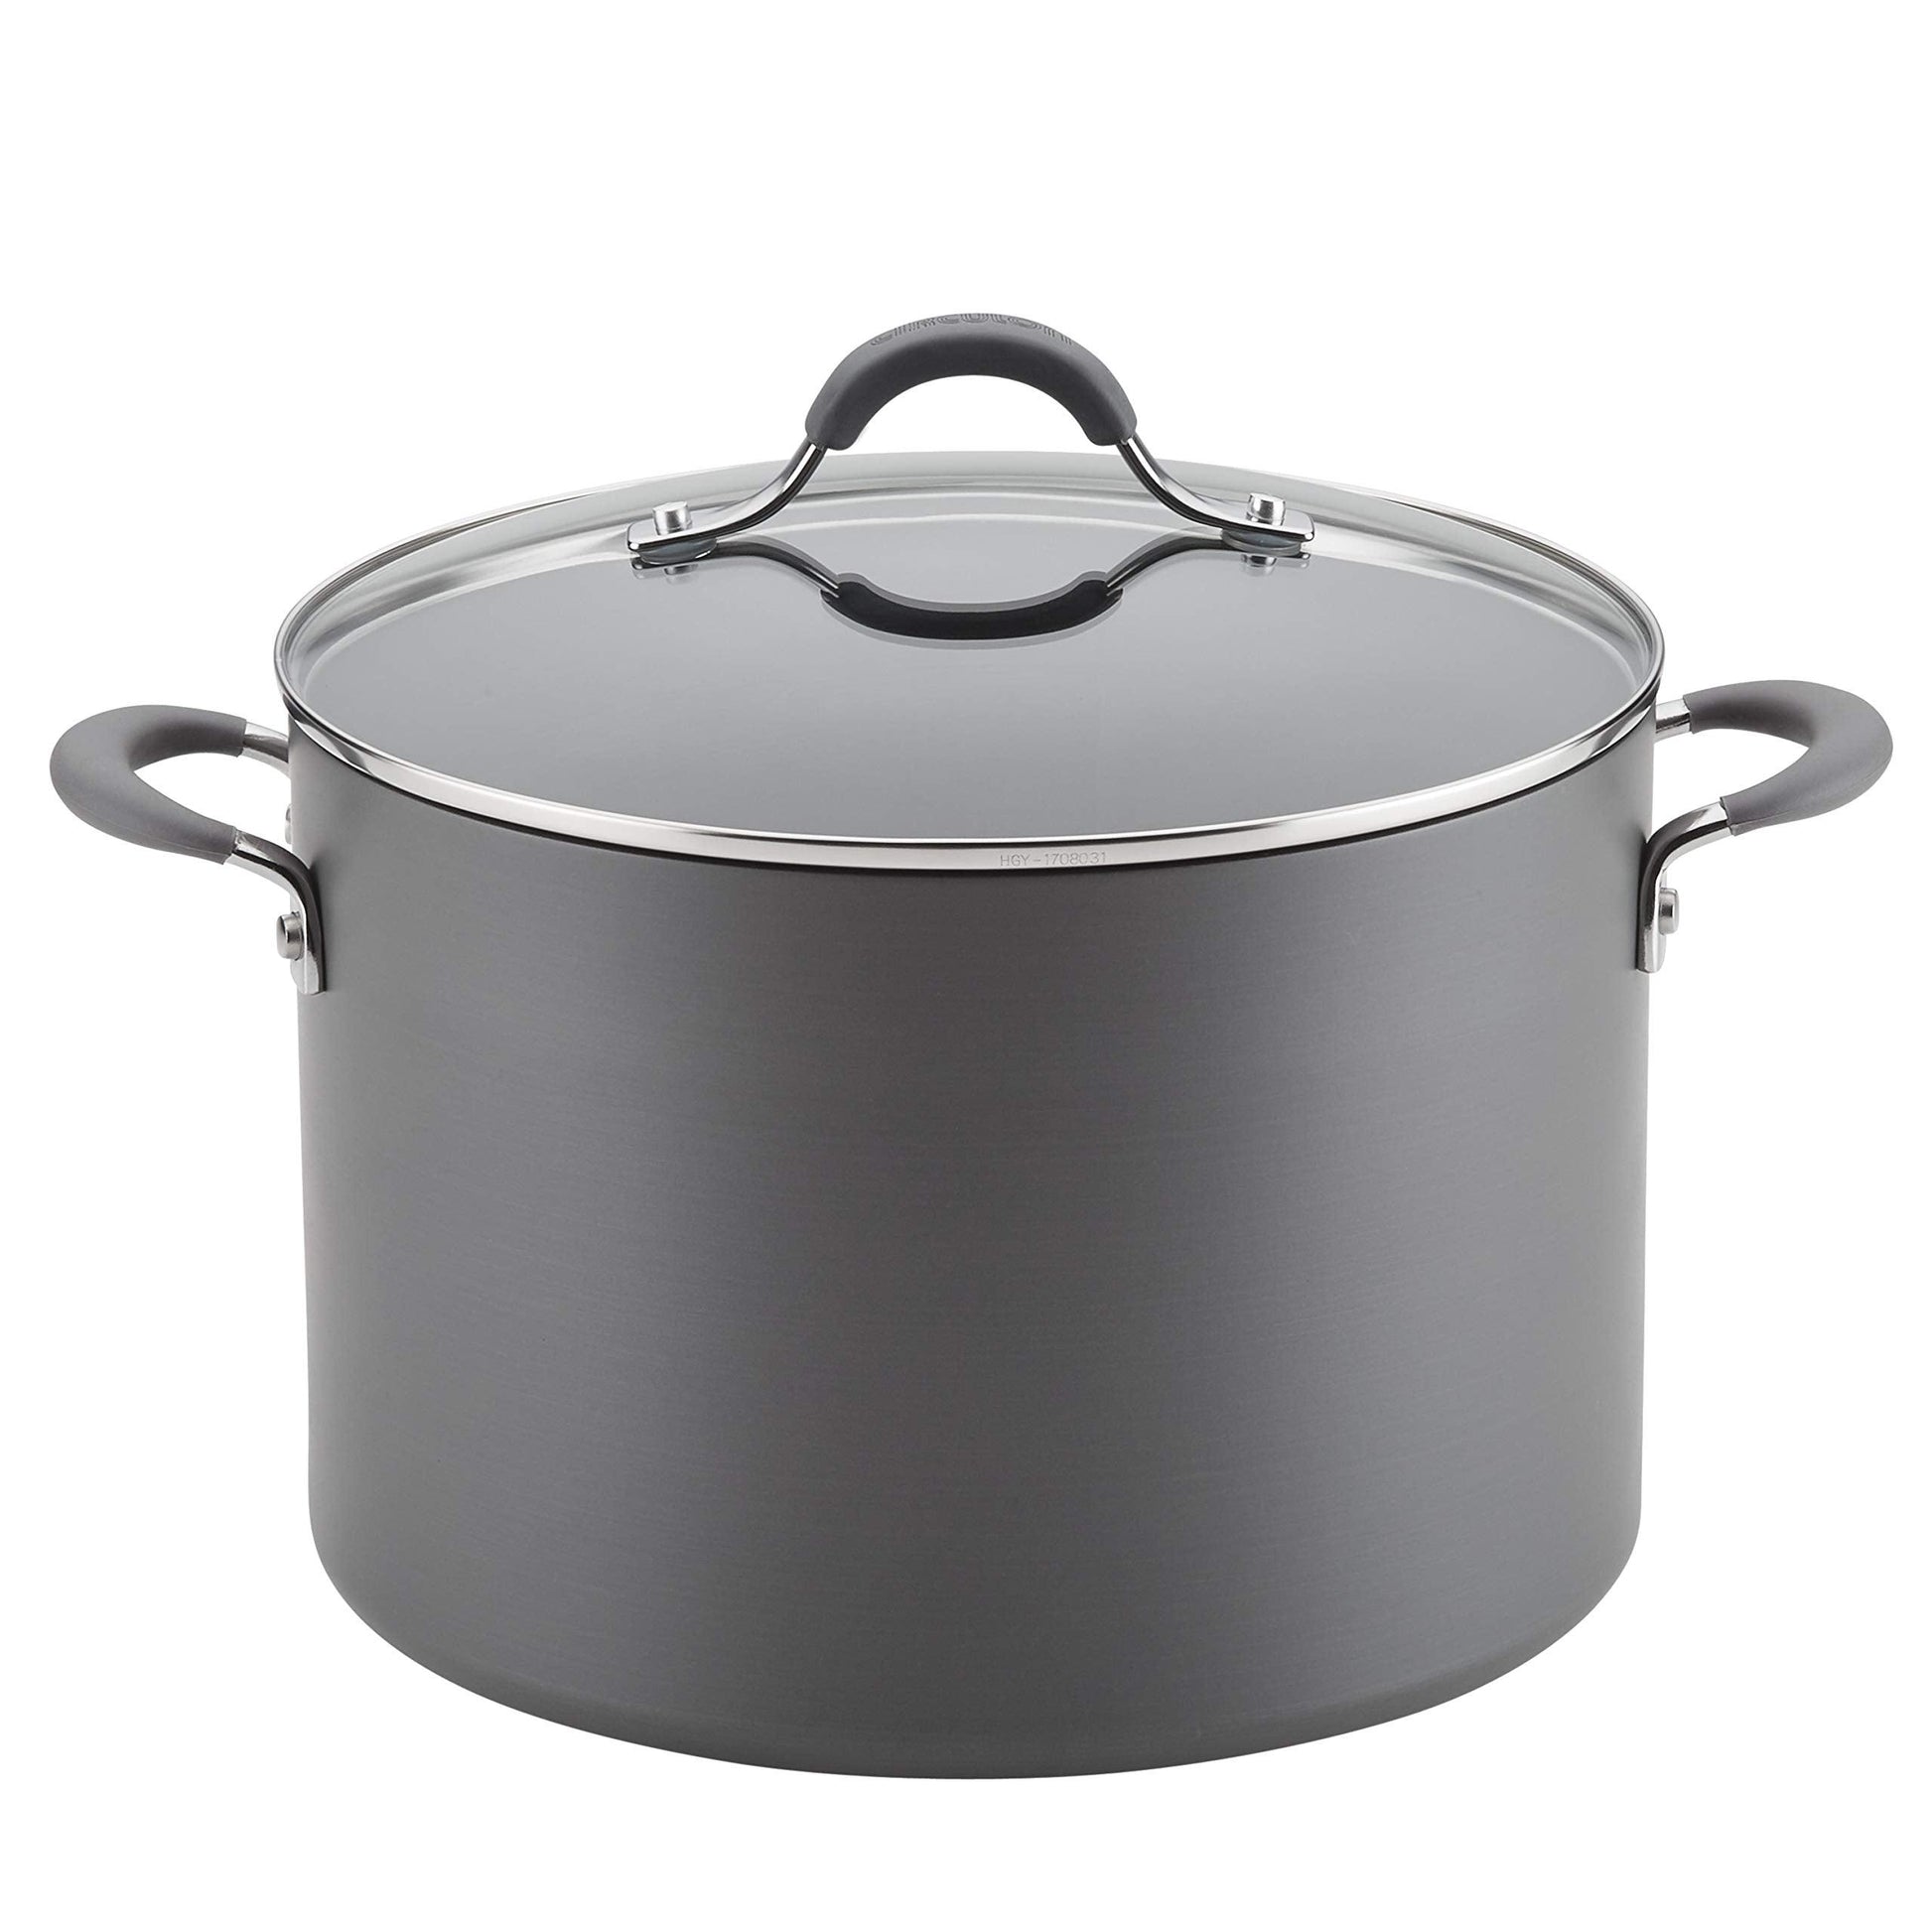 Circulon 83909 Radiance Hard Anodized Nonstick Stock Pot/Stockpot with Lid - 10 Quart, Gray - CookCave